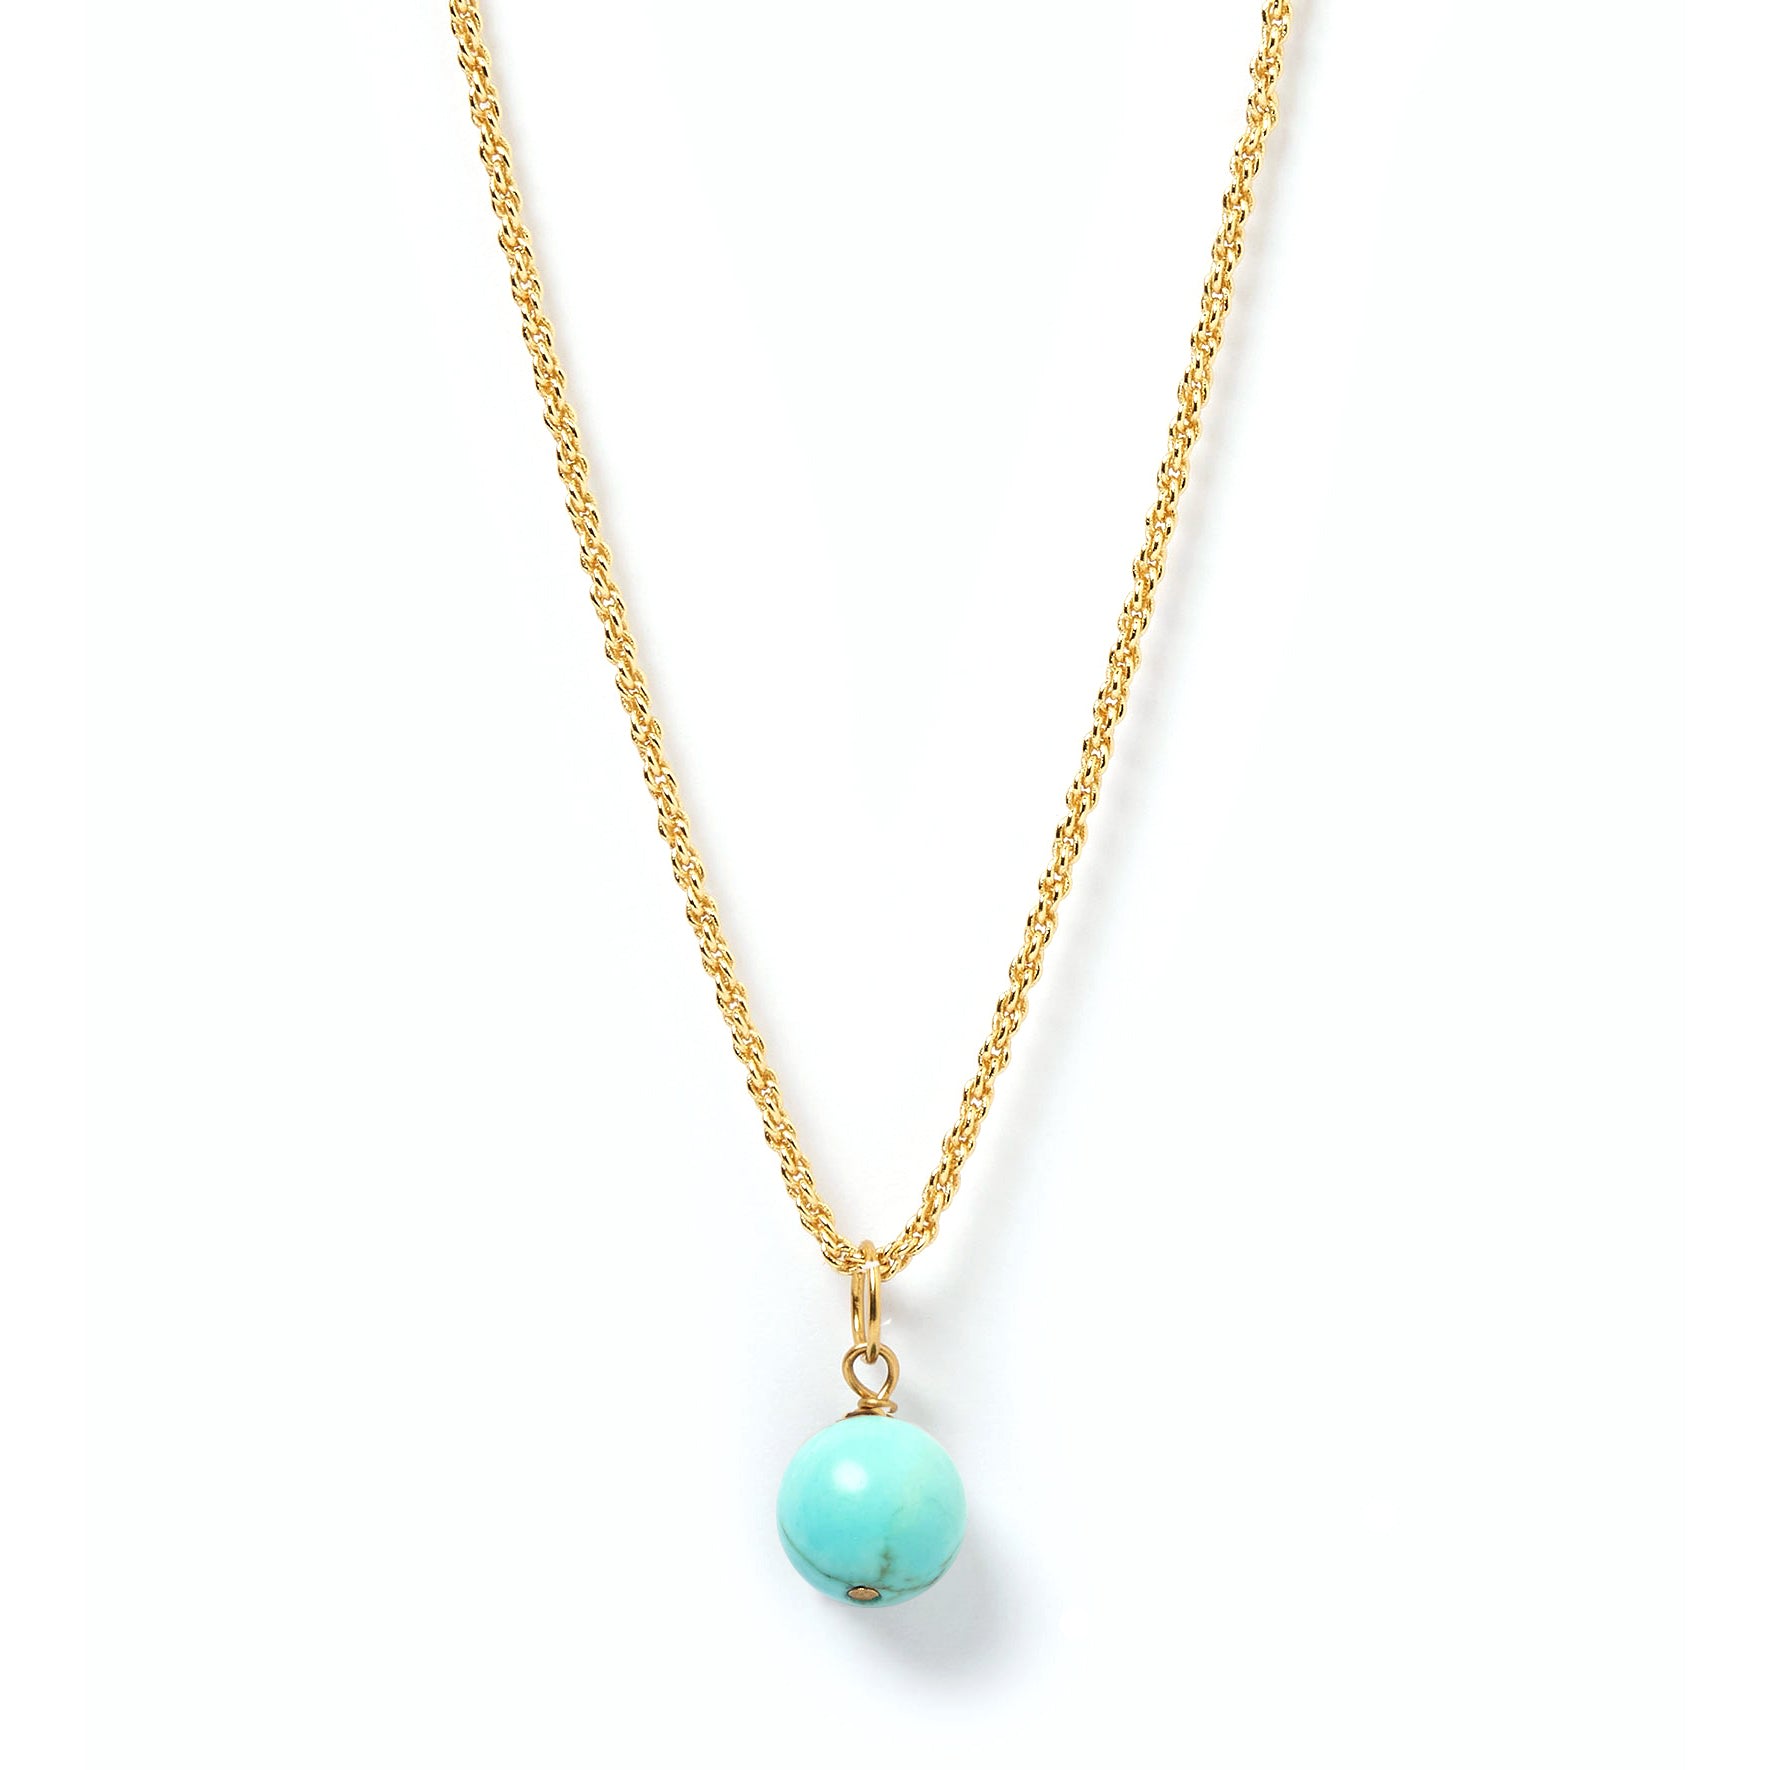 Women’s Kiki Crystal Pendant Necklace - Turquoise Arms of Eve